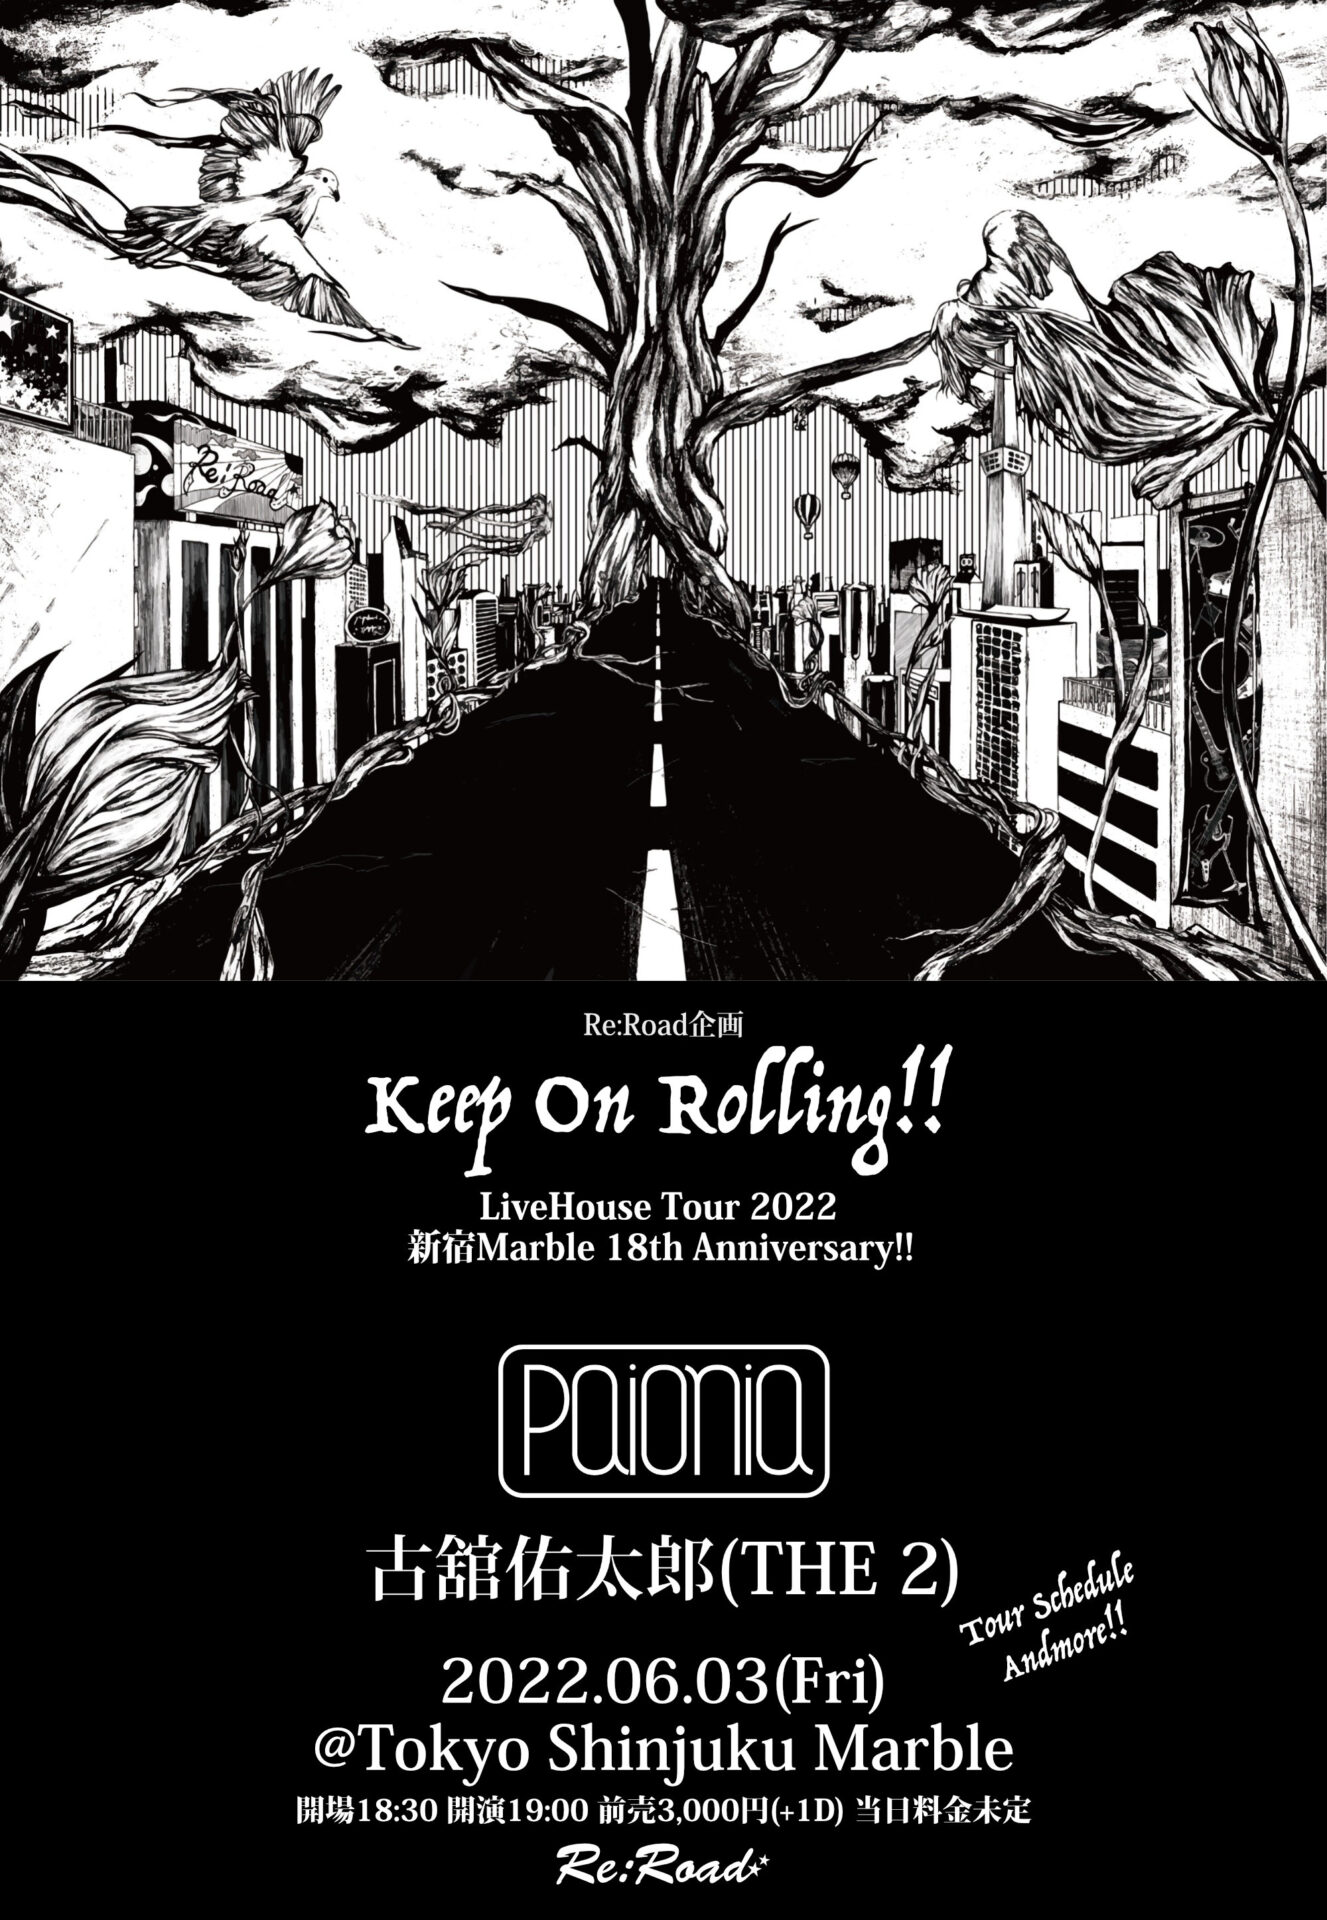 Re:Road presents「Keep On Rolling!! LiveHouse Tour 2022 」 新宿Marble 18th Anniversary!!